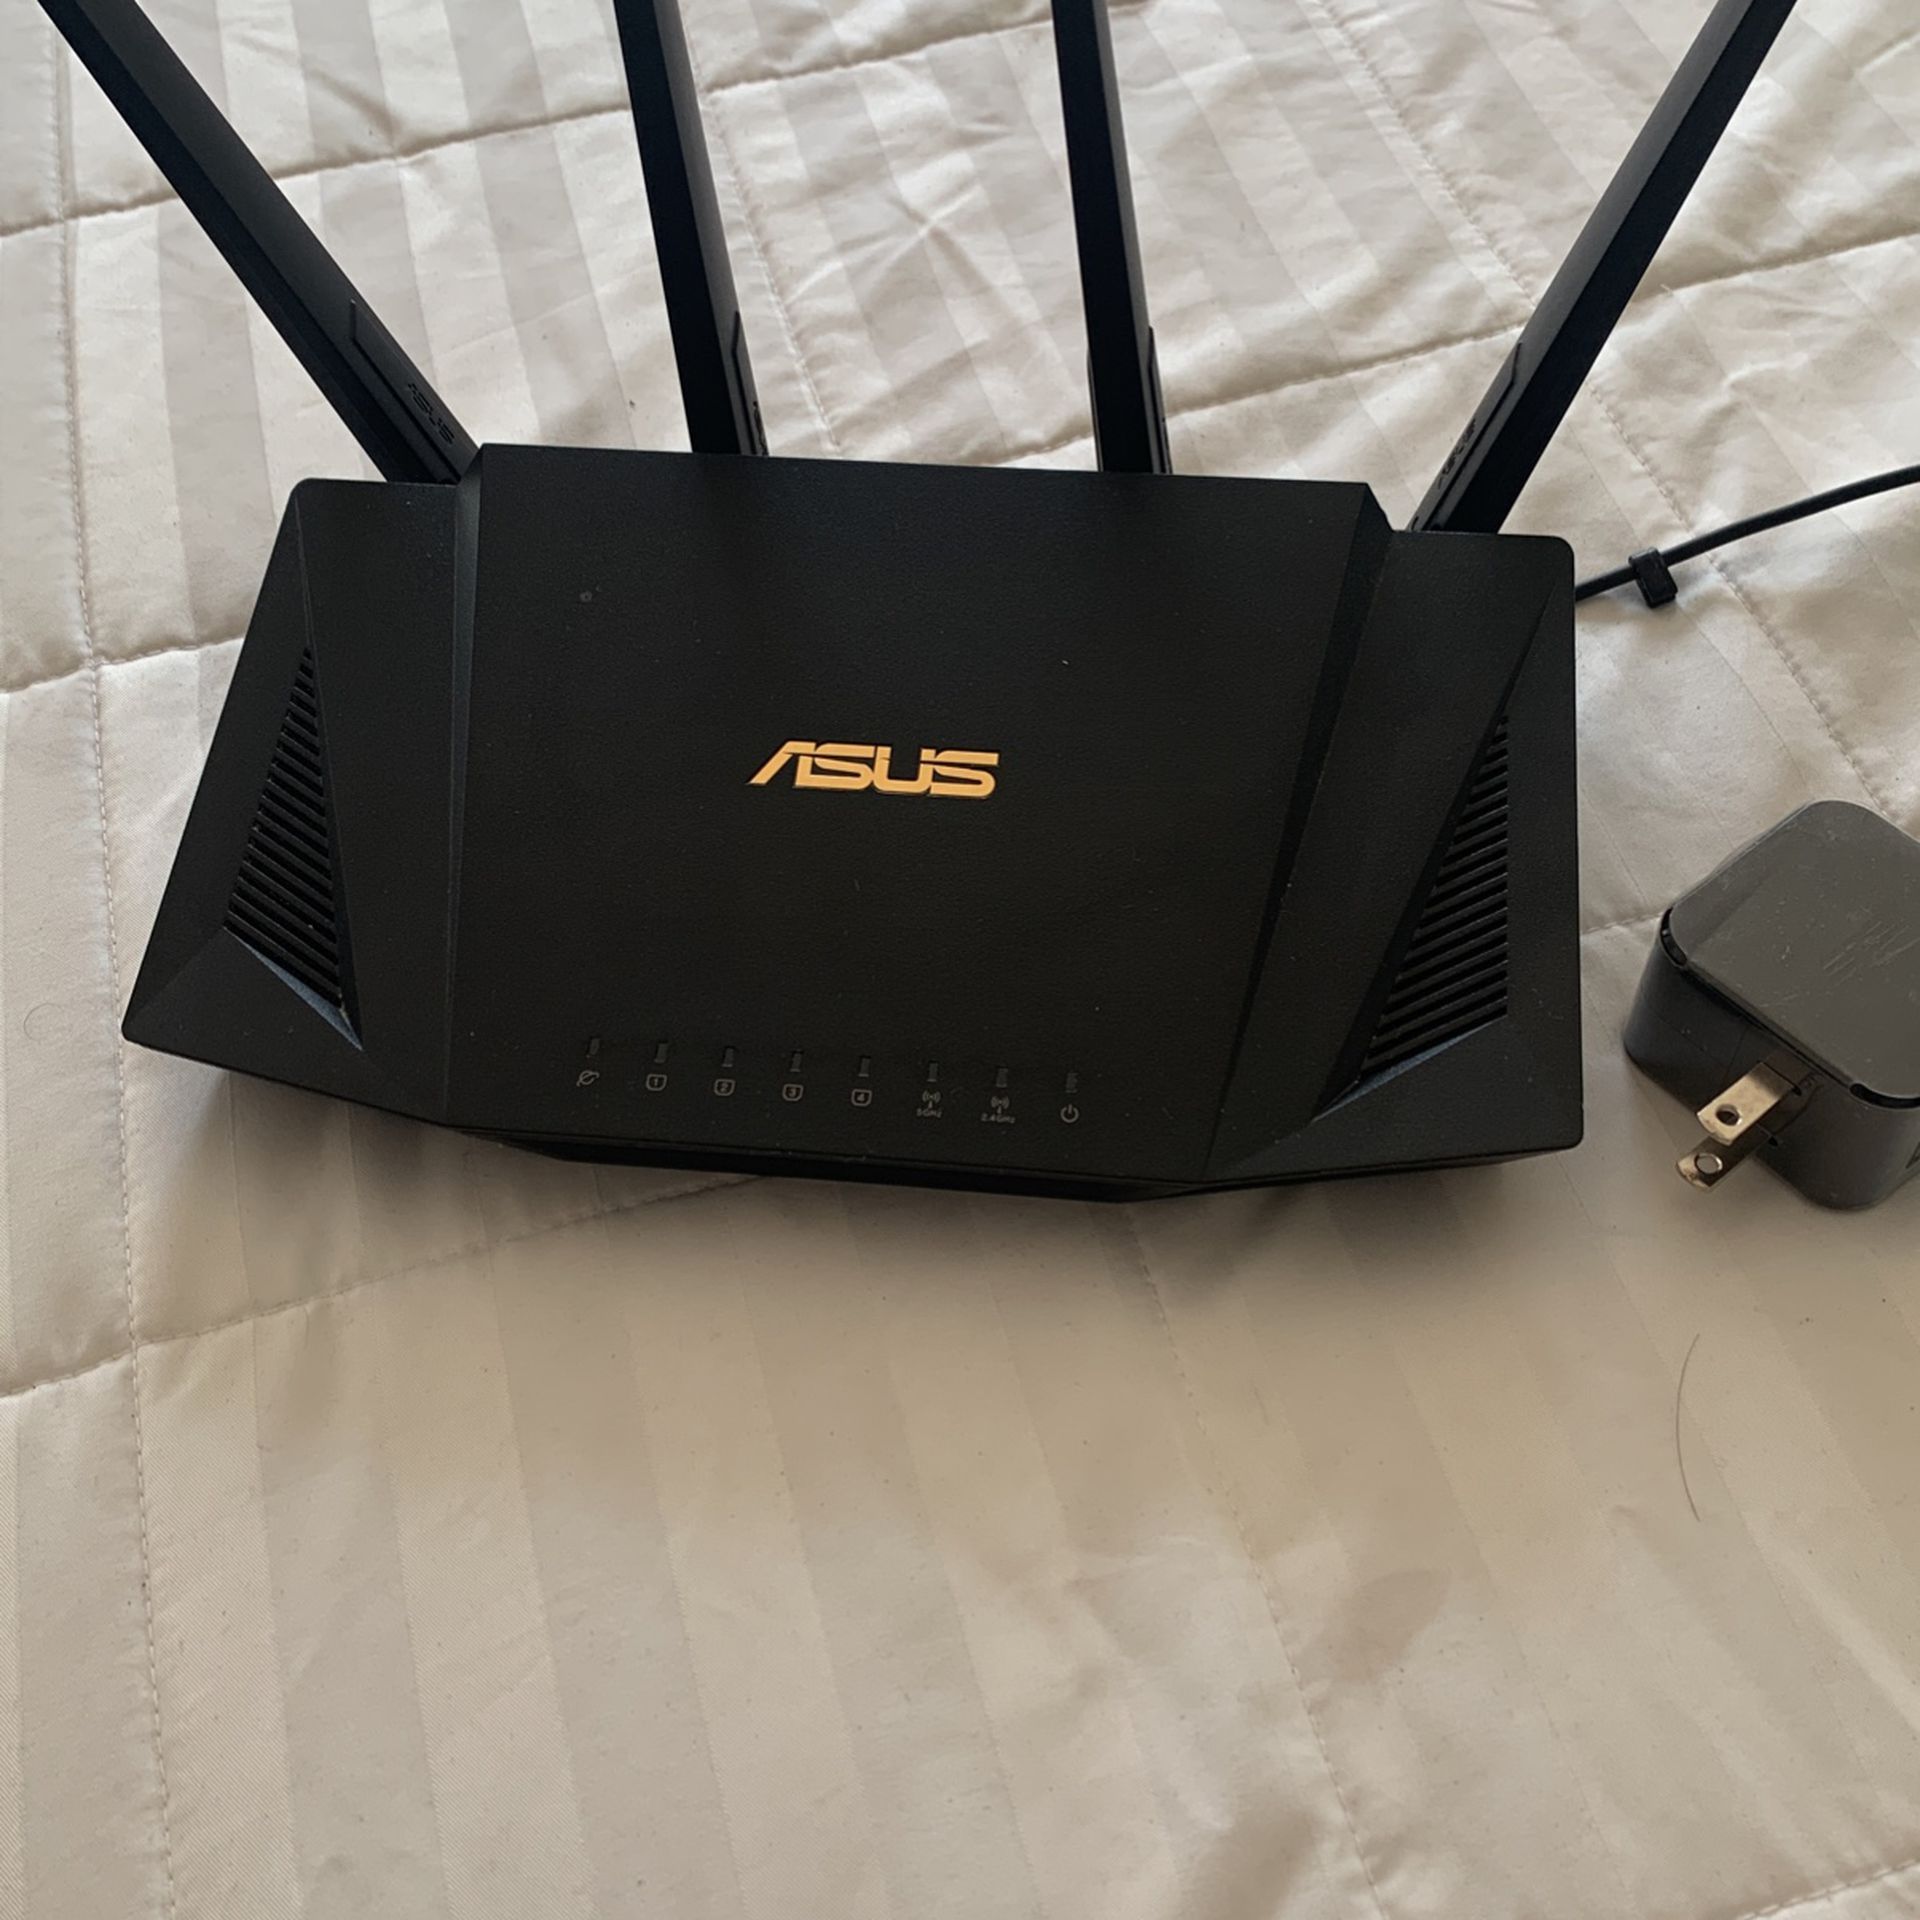 Asus AX3000 WiFi Router